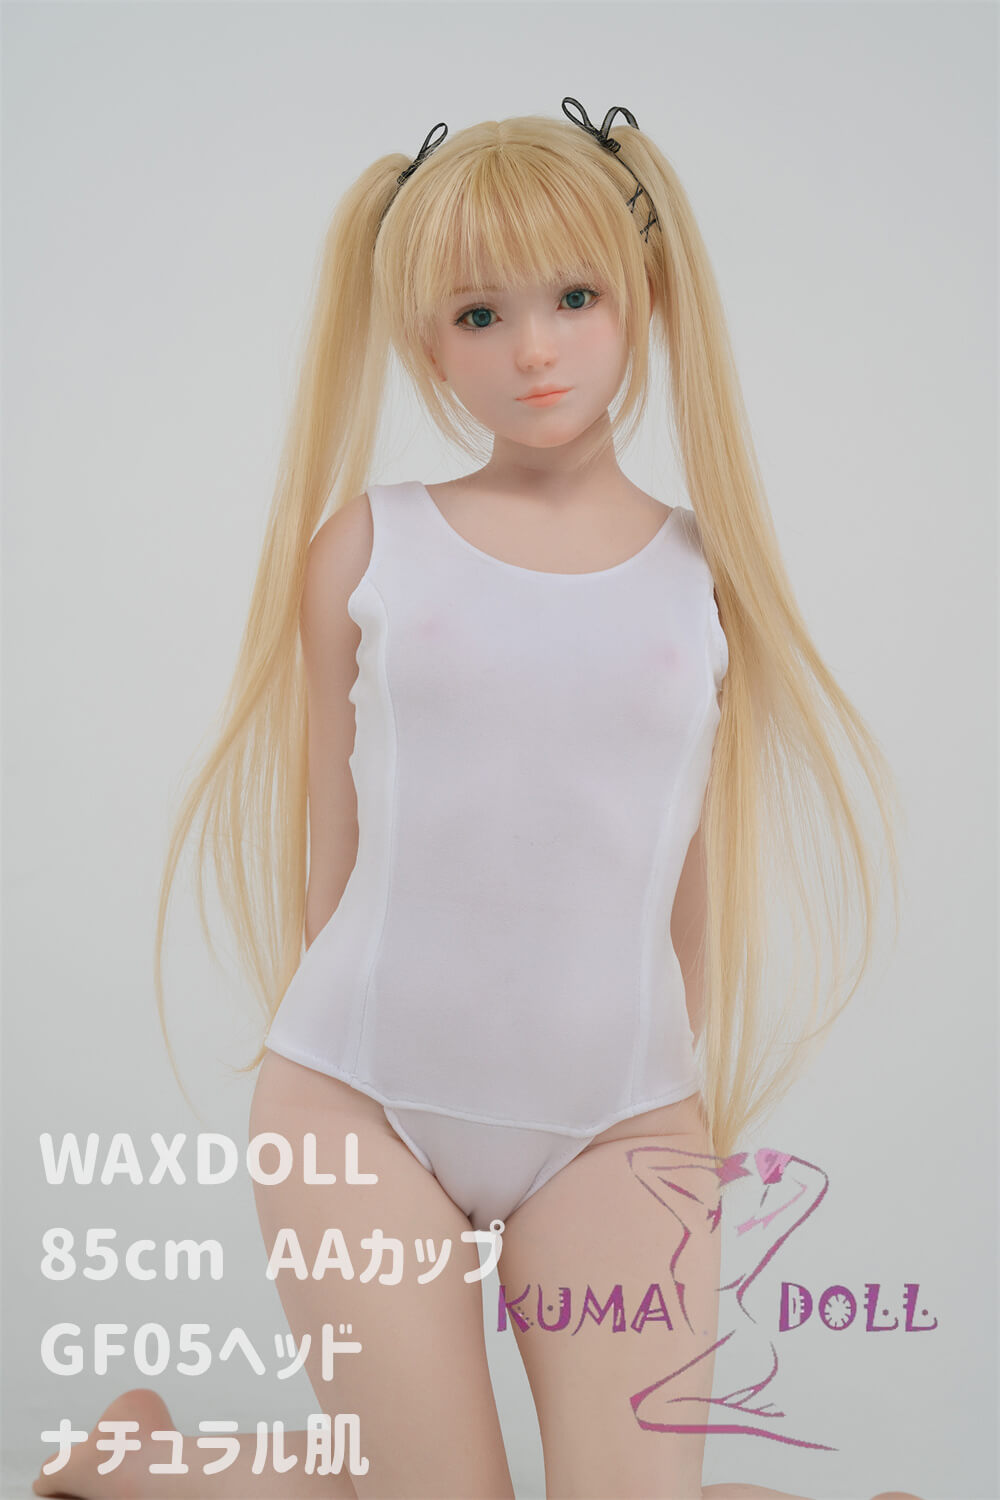 ZELEX DOLL 7kg Full Silicone Love doll 85cm/2ft8 flat breast mini doll #GF05 head with realistic make-up